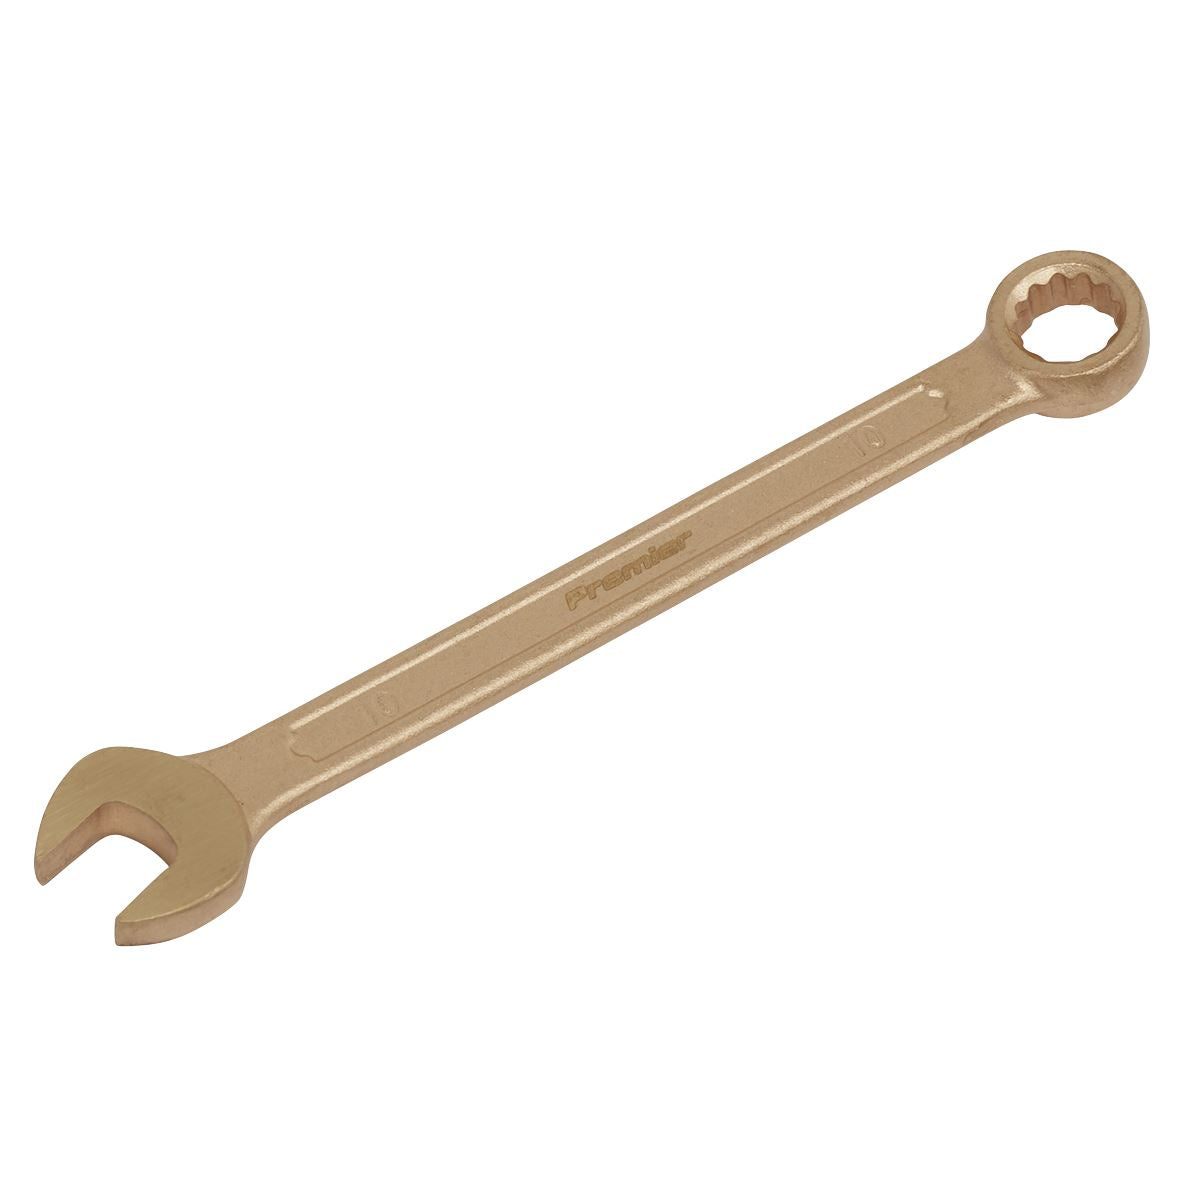 Sealey Premier Combination Spanner 10mm - Non-Sparking